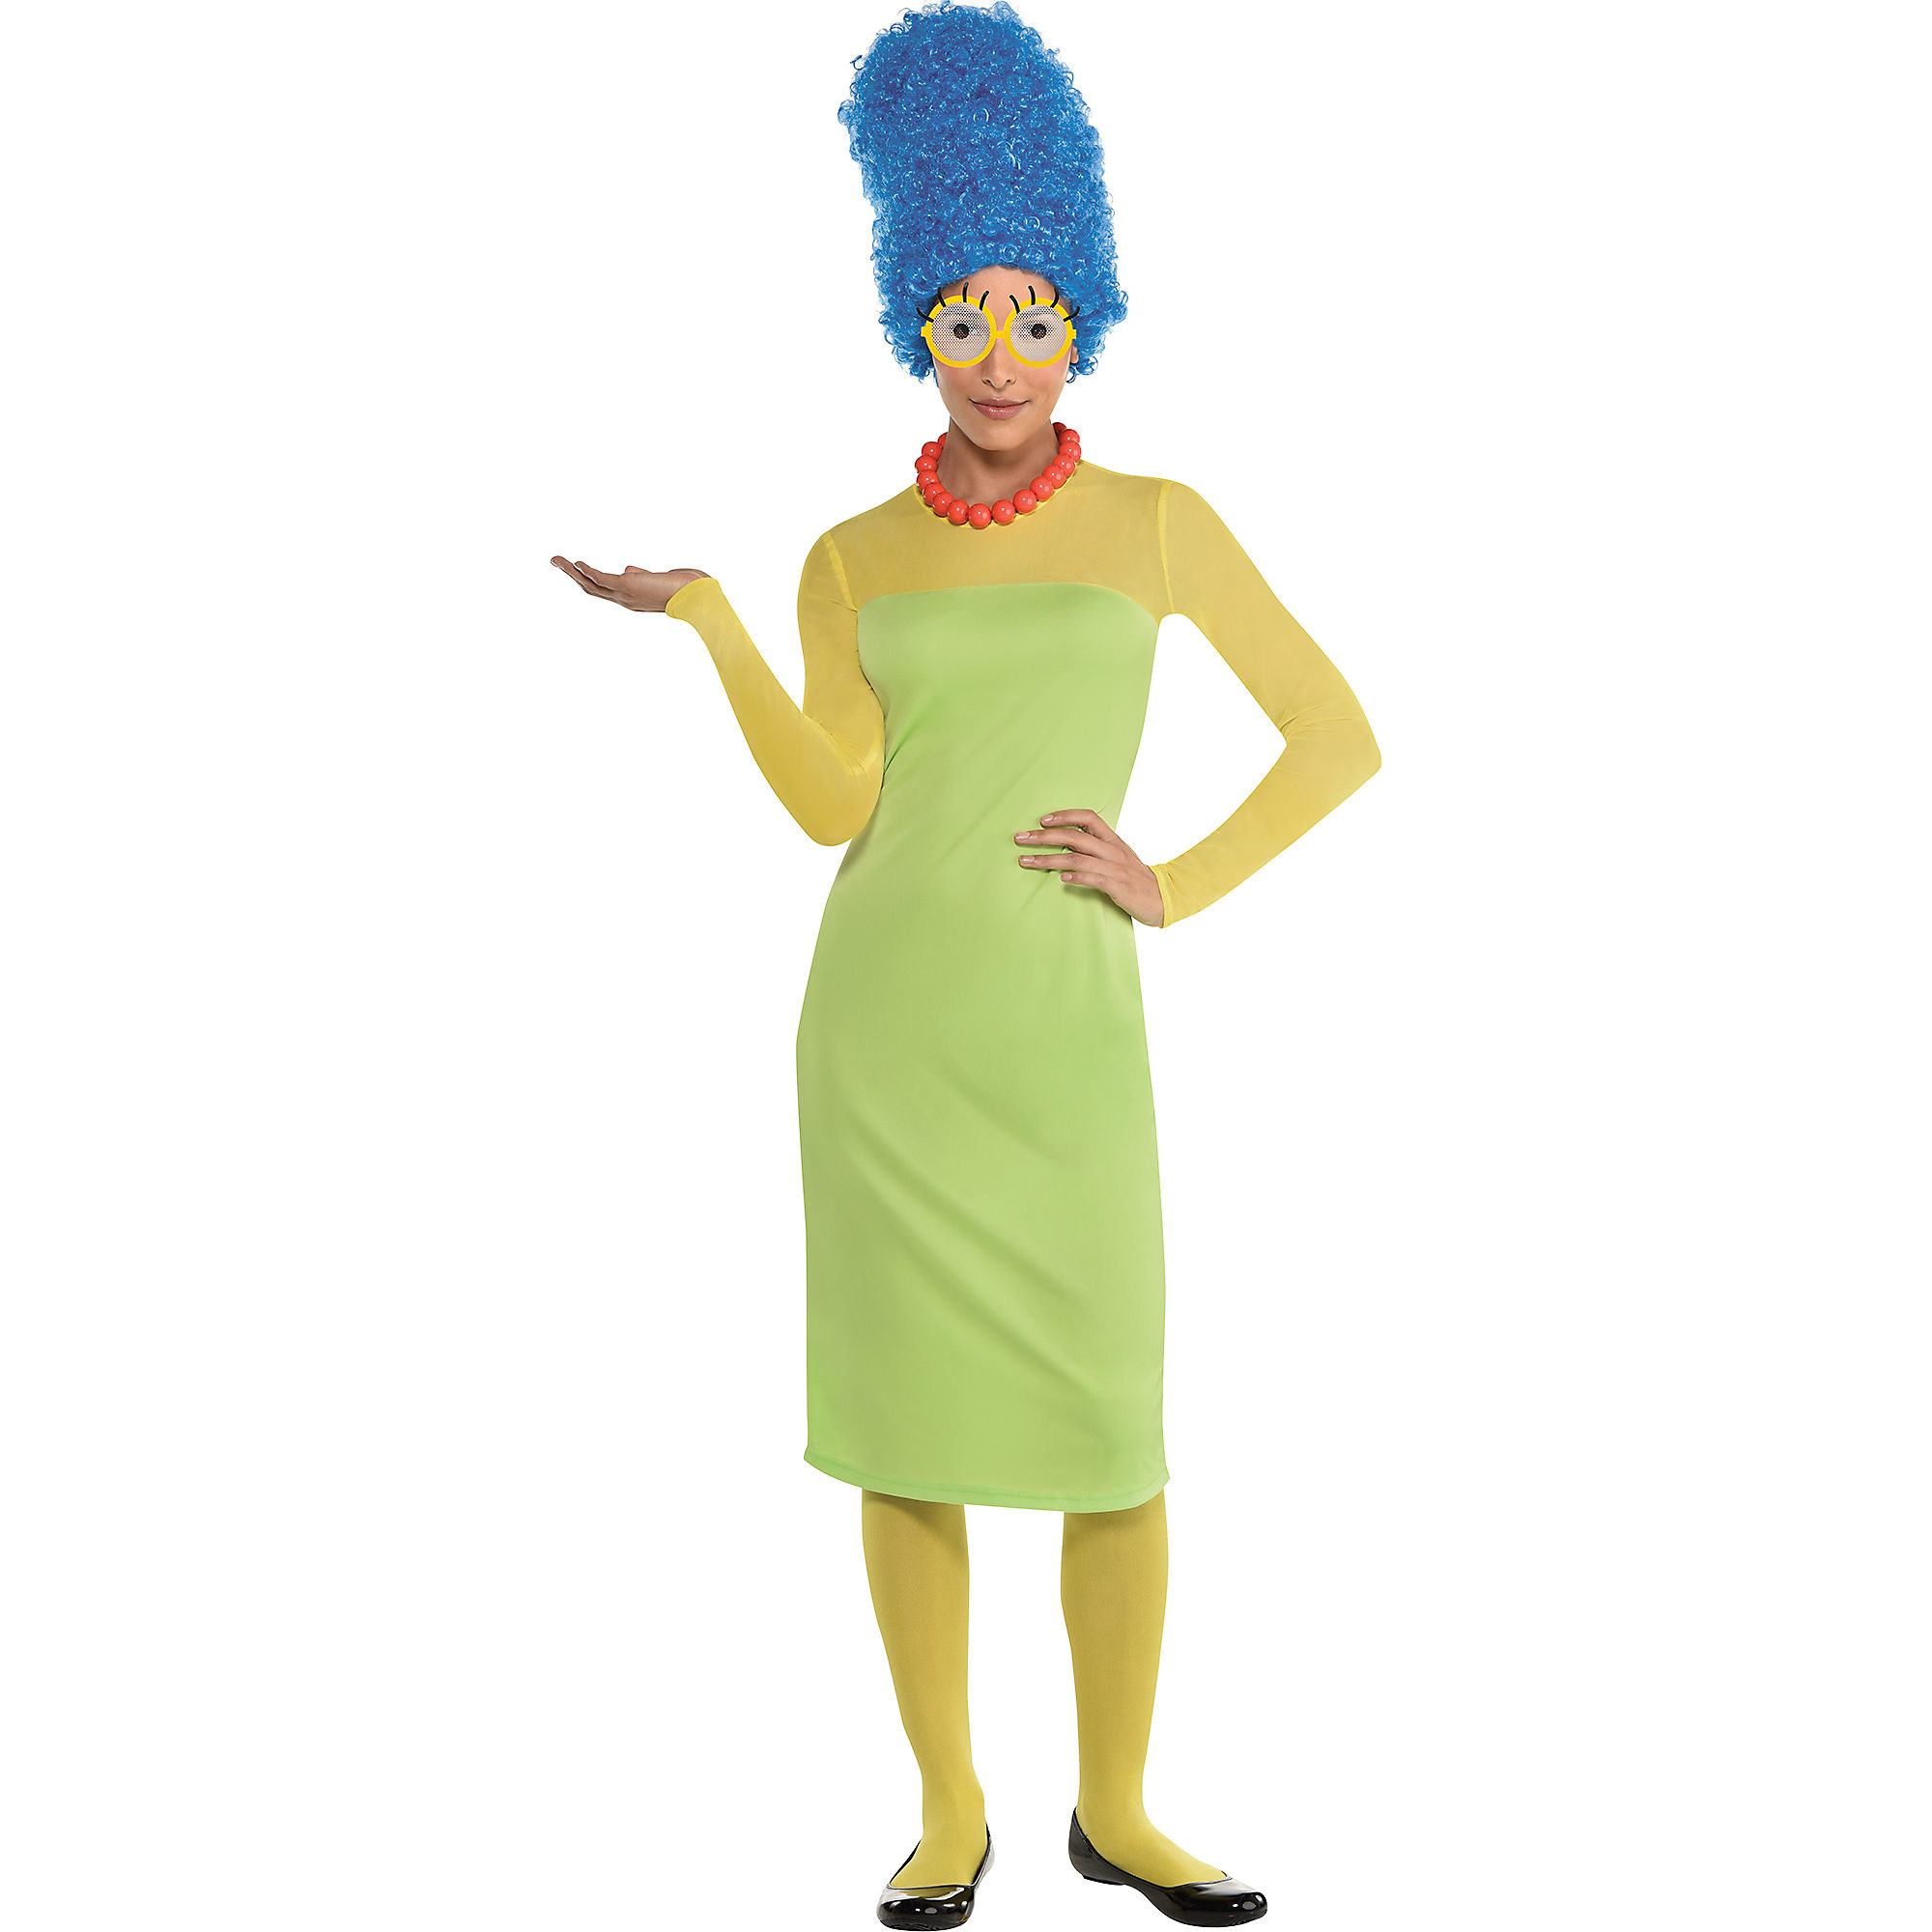 model wearing the simpsons costume